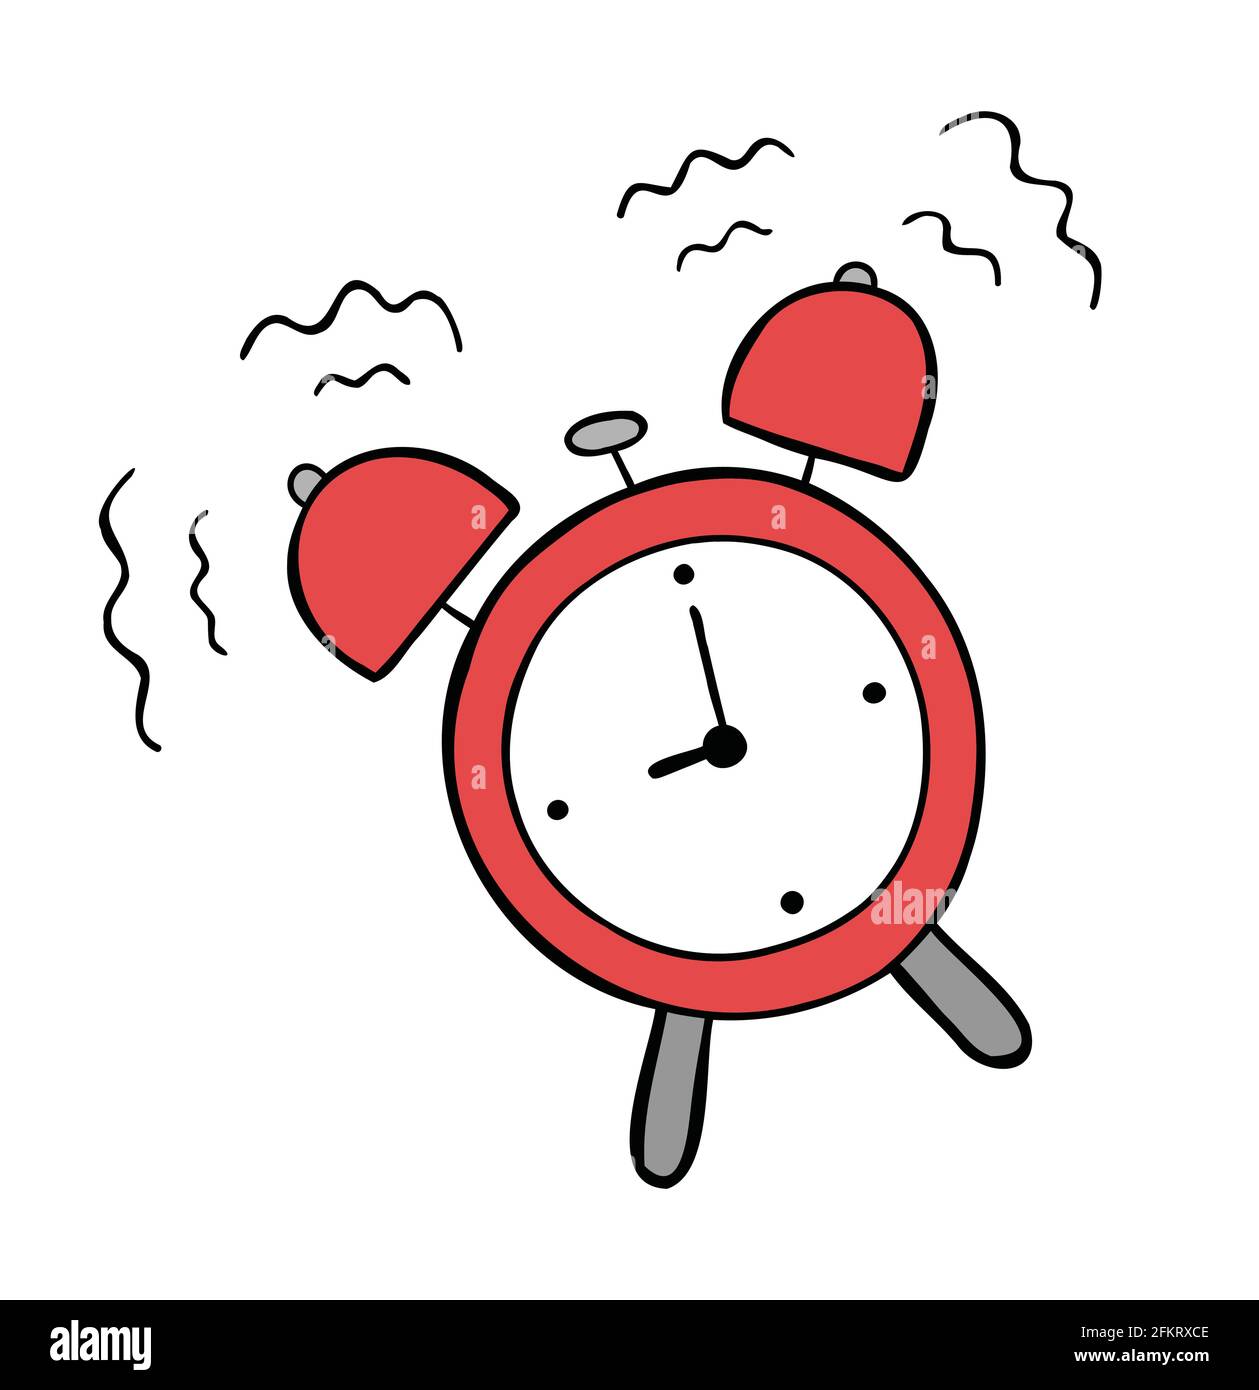 https://c8.alamy.com/comp/2FKRXCE/cartoon-vector-illustration-of-alarm-clock-ringing-colored-and-black-outlines-2FKRXCE.jpg